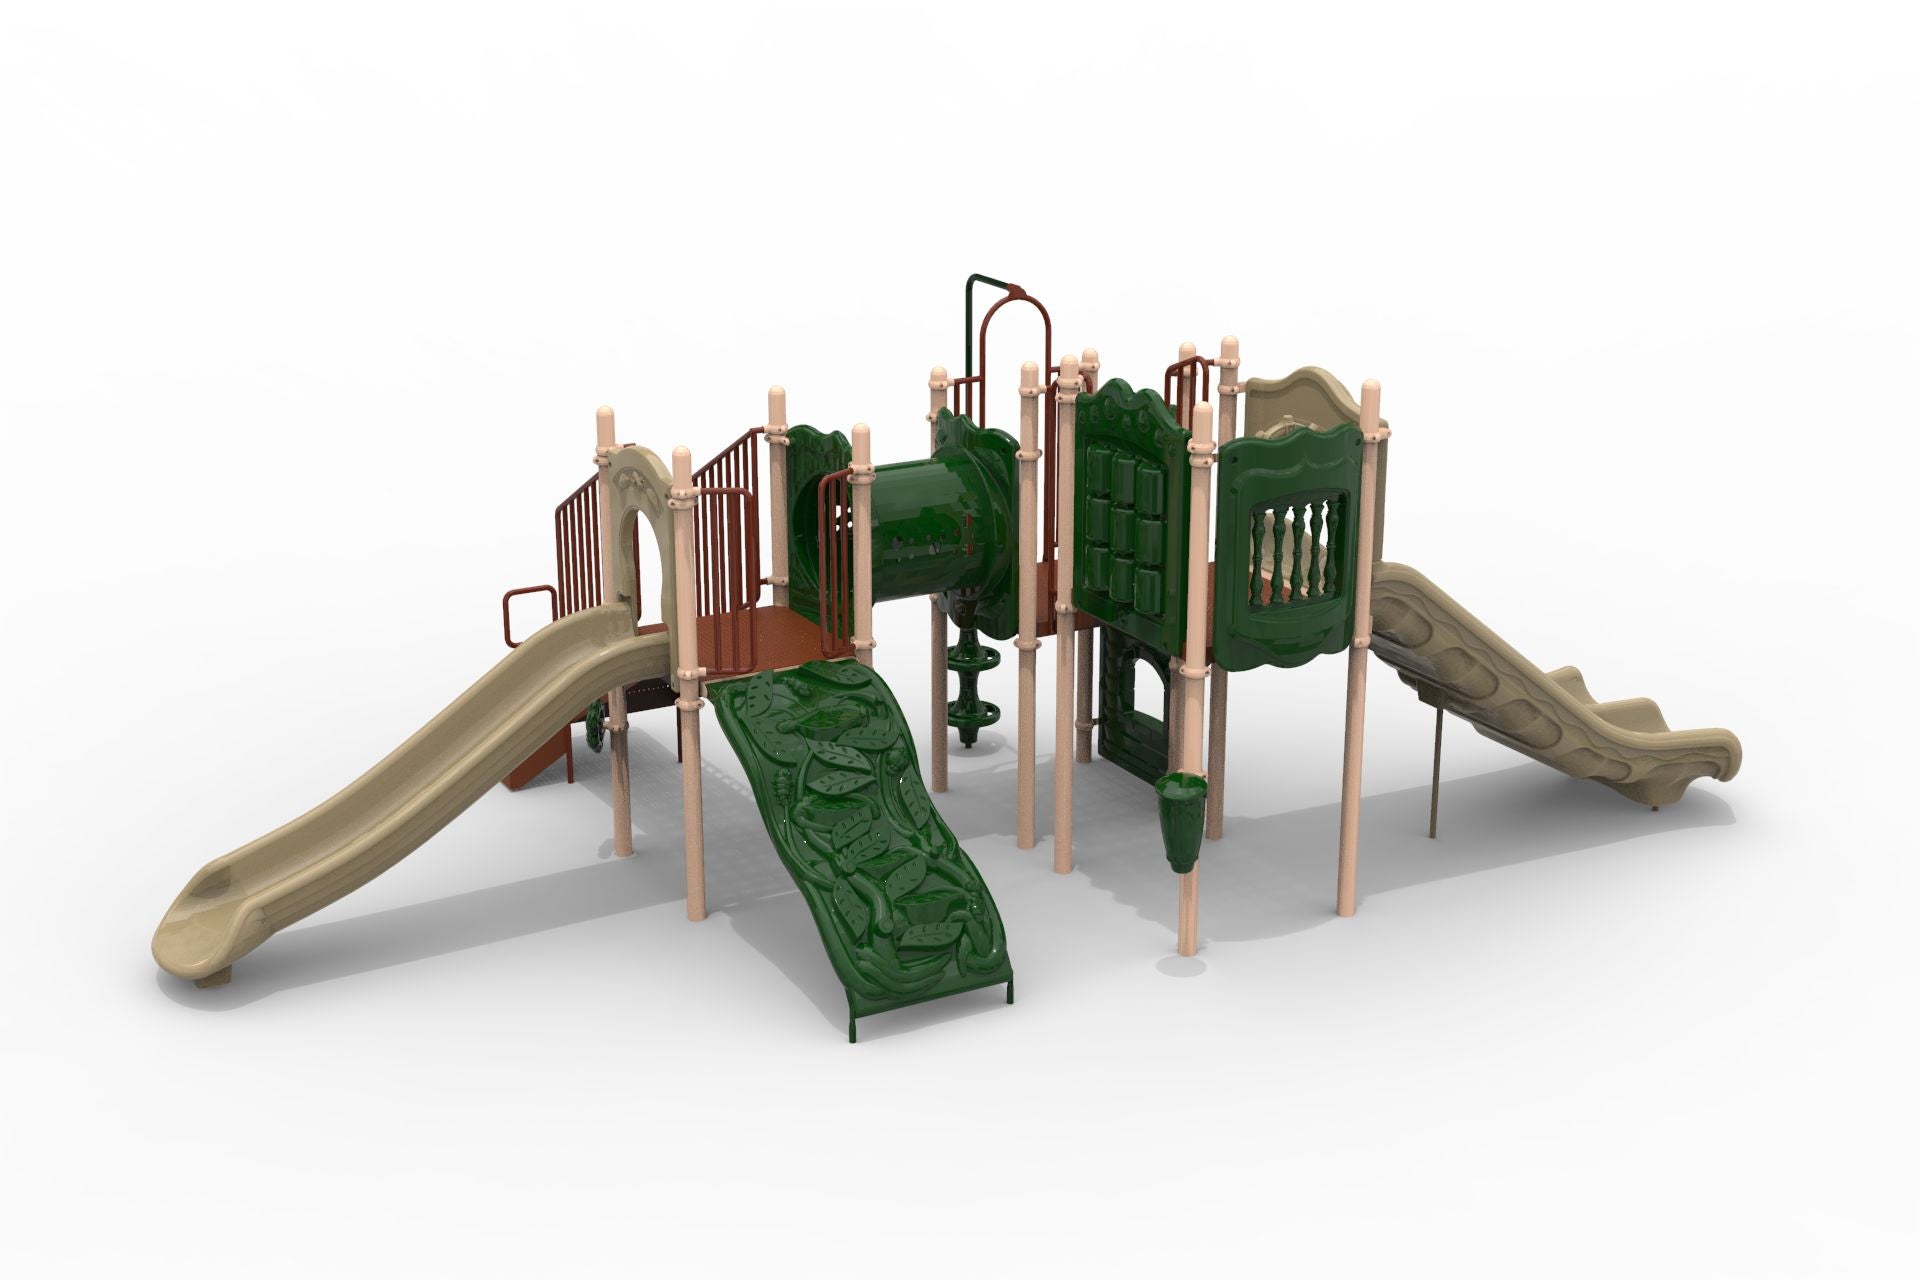 Carsons Canyon Play System